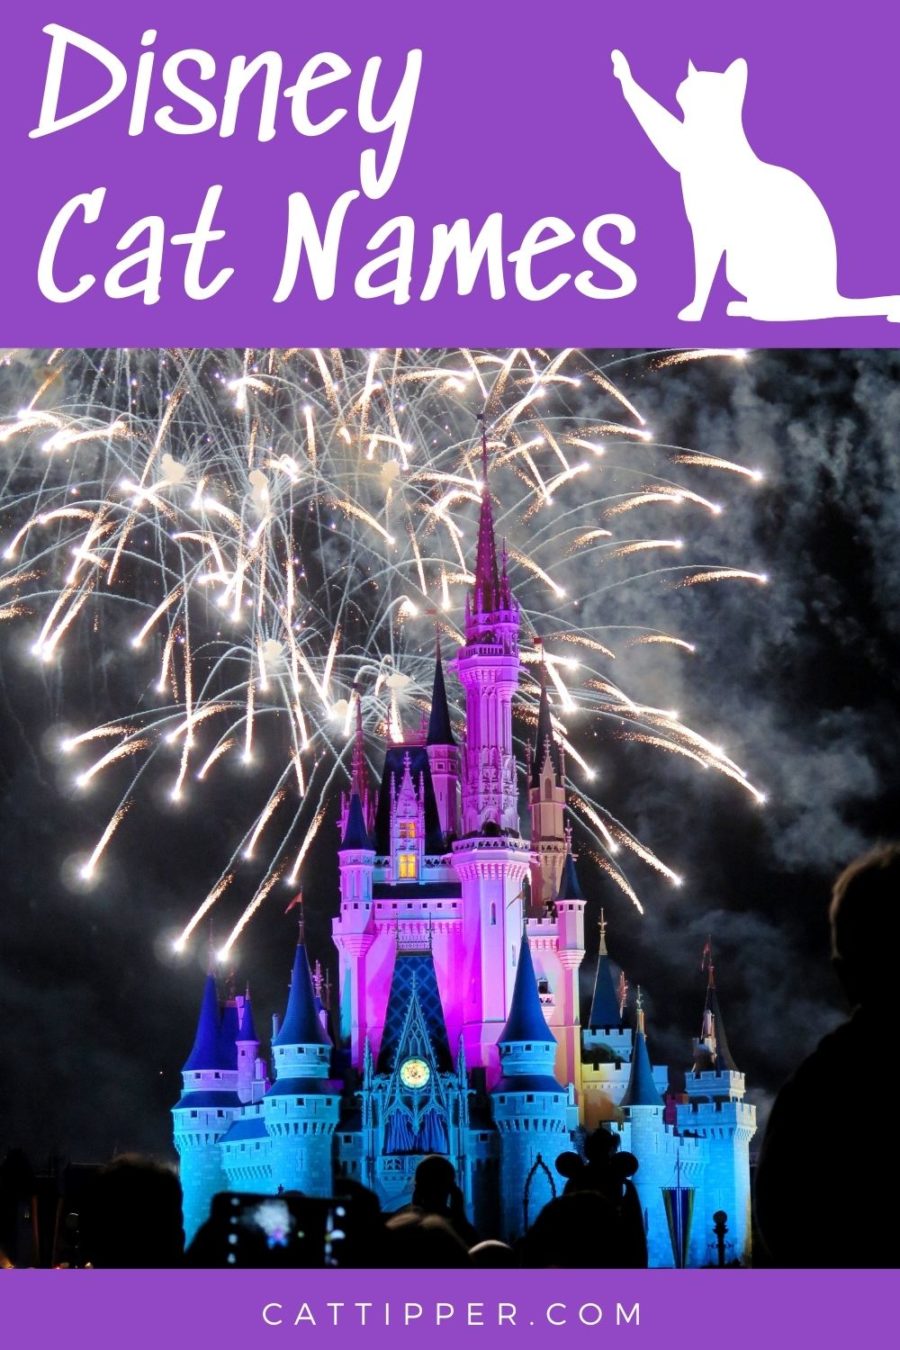 Disney Cat Names -- classic cat characters from Disney movies